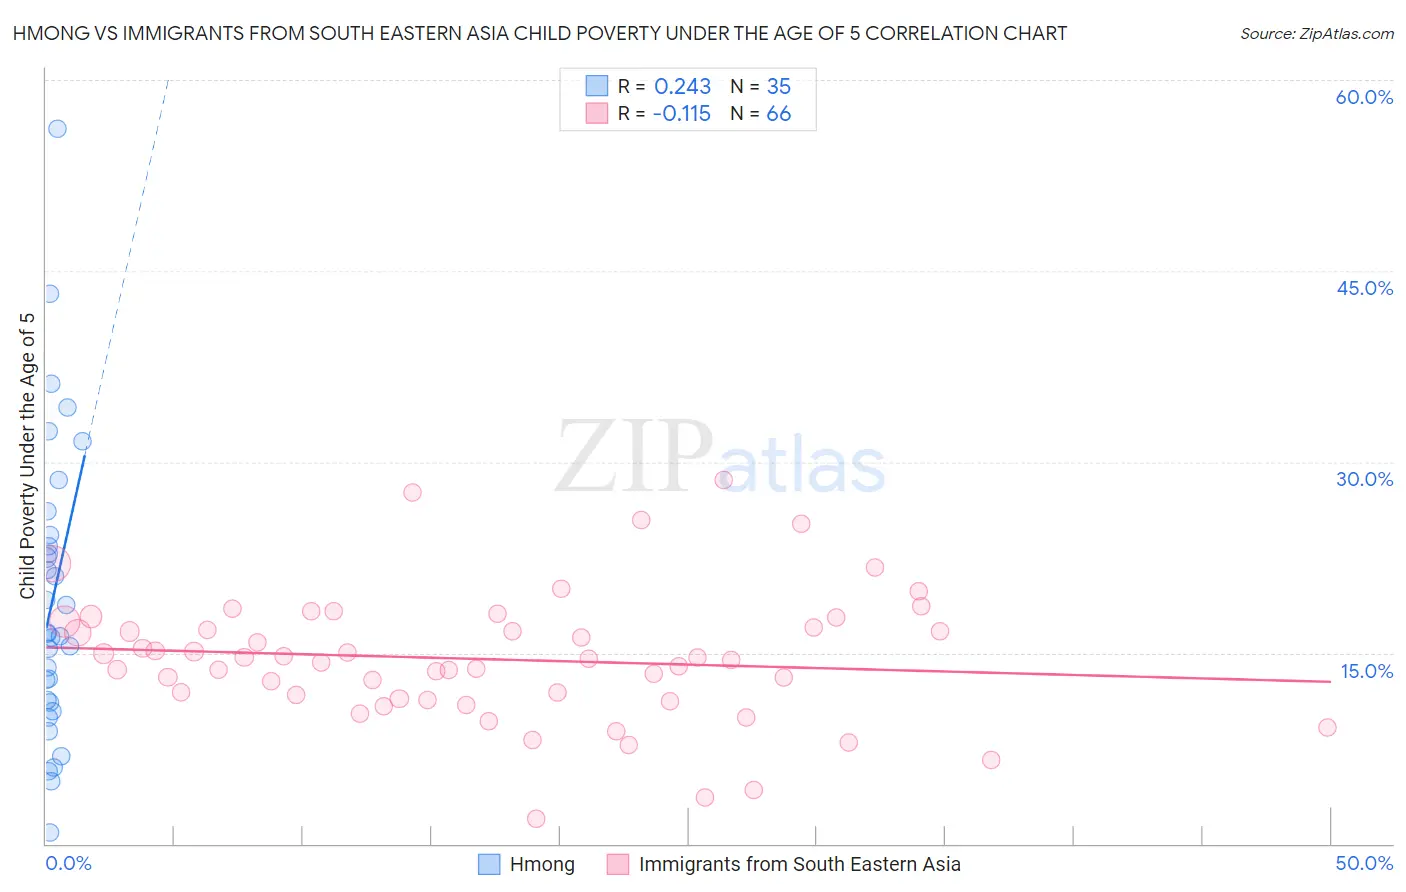 Hmong vs Immigrants from South Eastern Asia Child Poverty Under the Age of 5